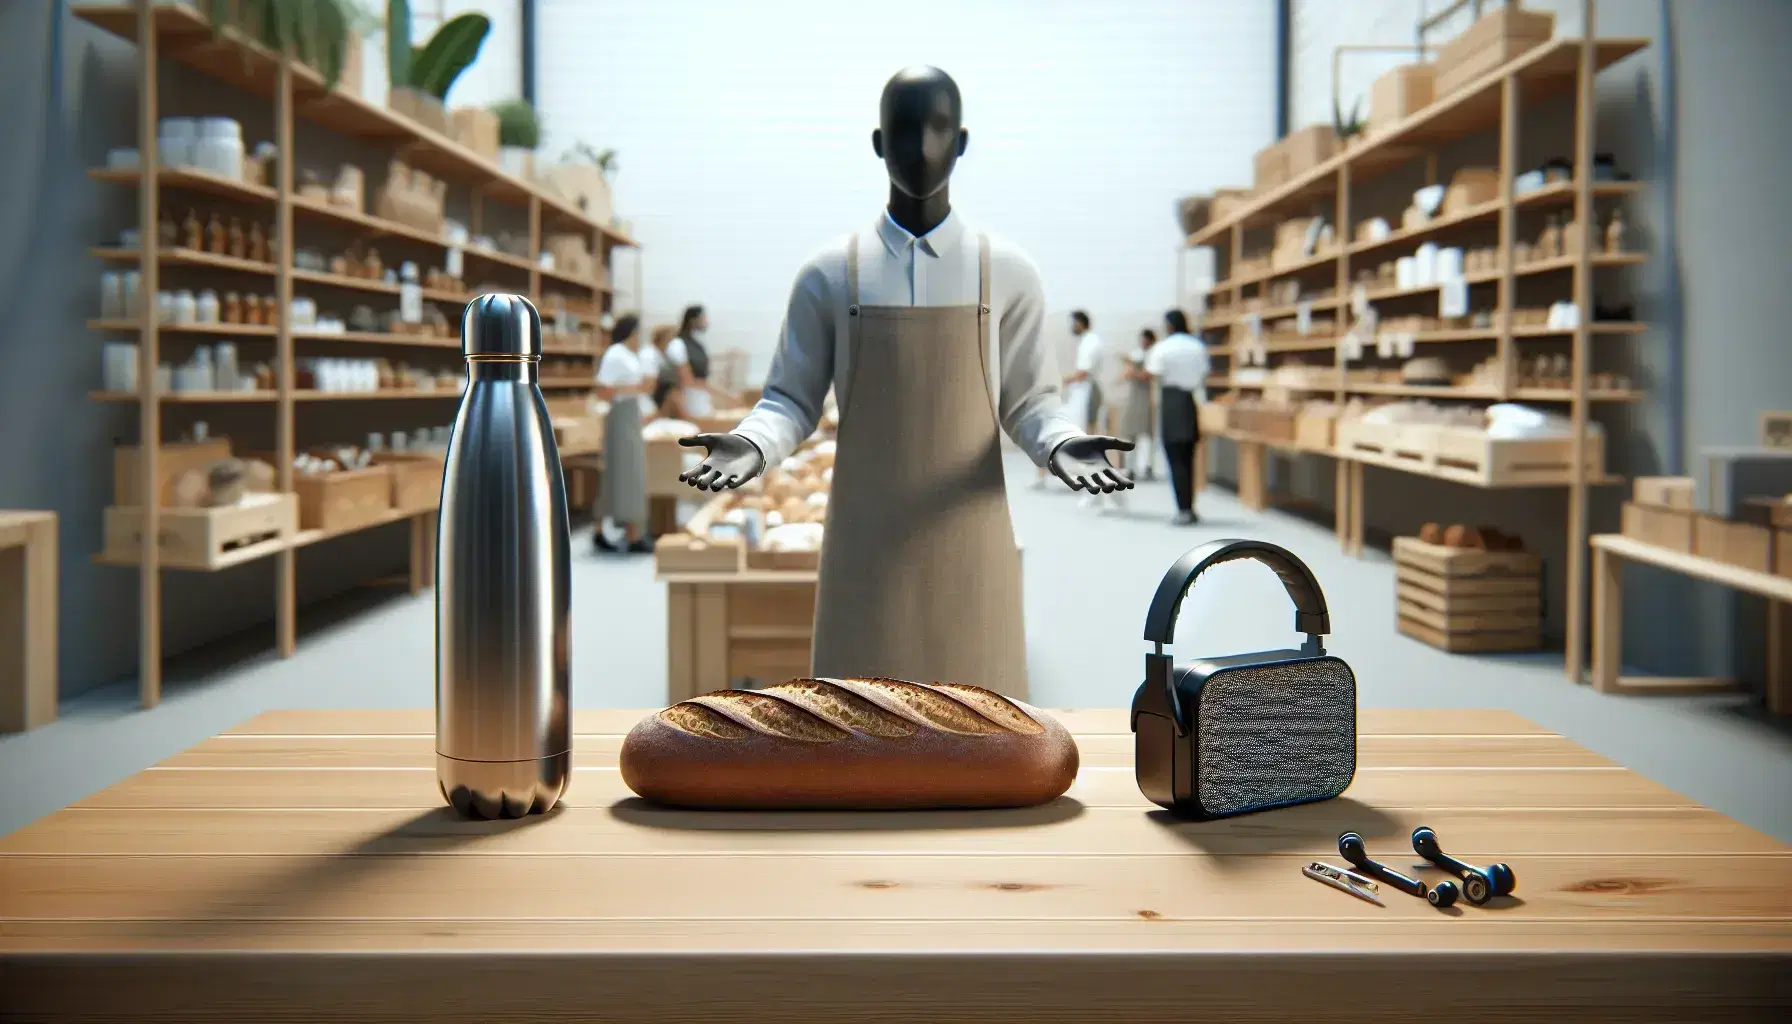 Modern marketplace with a wooden table displaying a stainless steel water bottle, artisanal bread, and wireless headphones, with an apron-clad vendor behind.